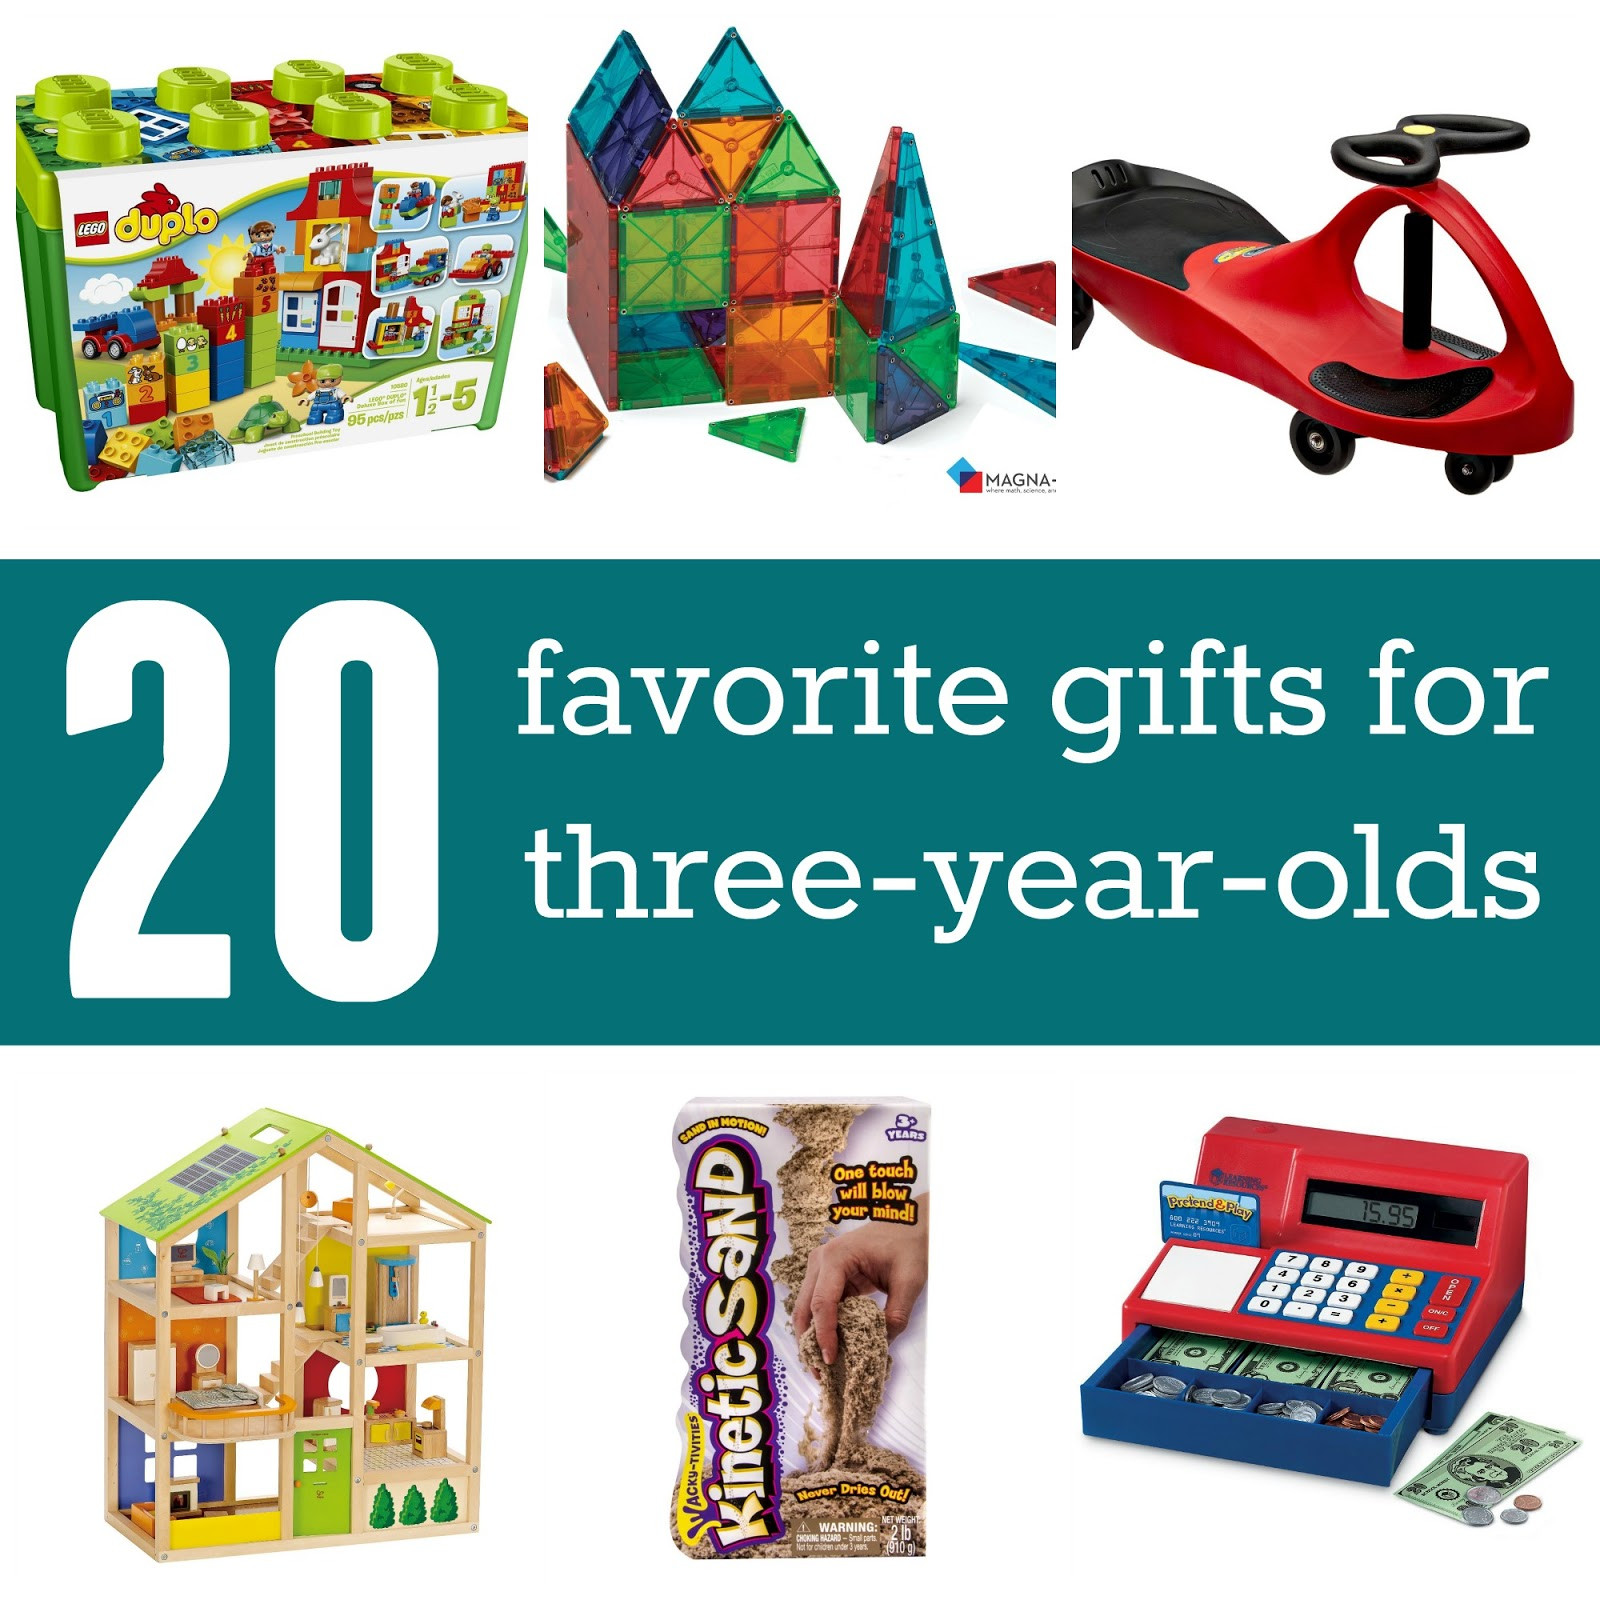 3 Year Old Birthday Gifts
 Toddler Approved Favorite Gifts for 3 year olds